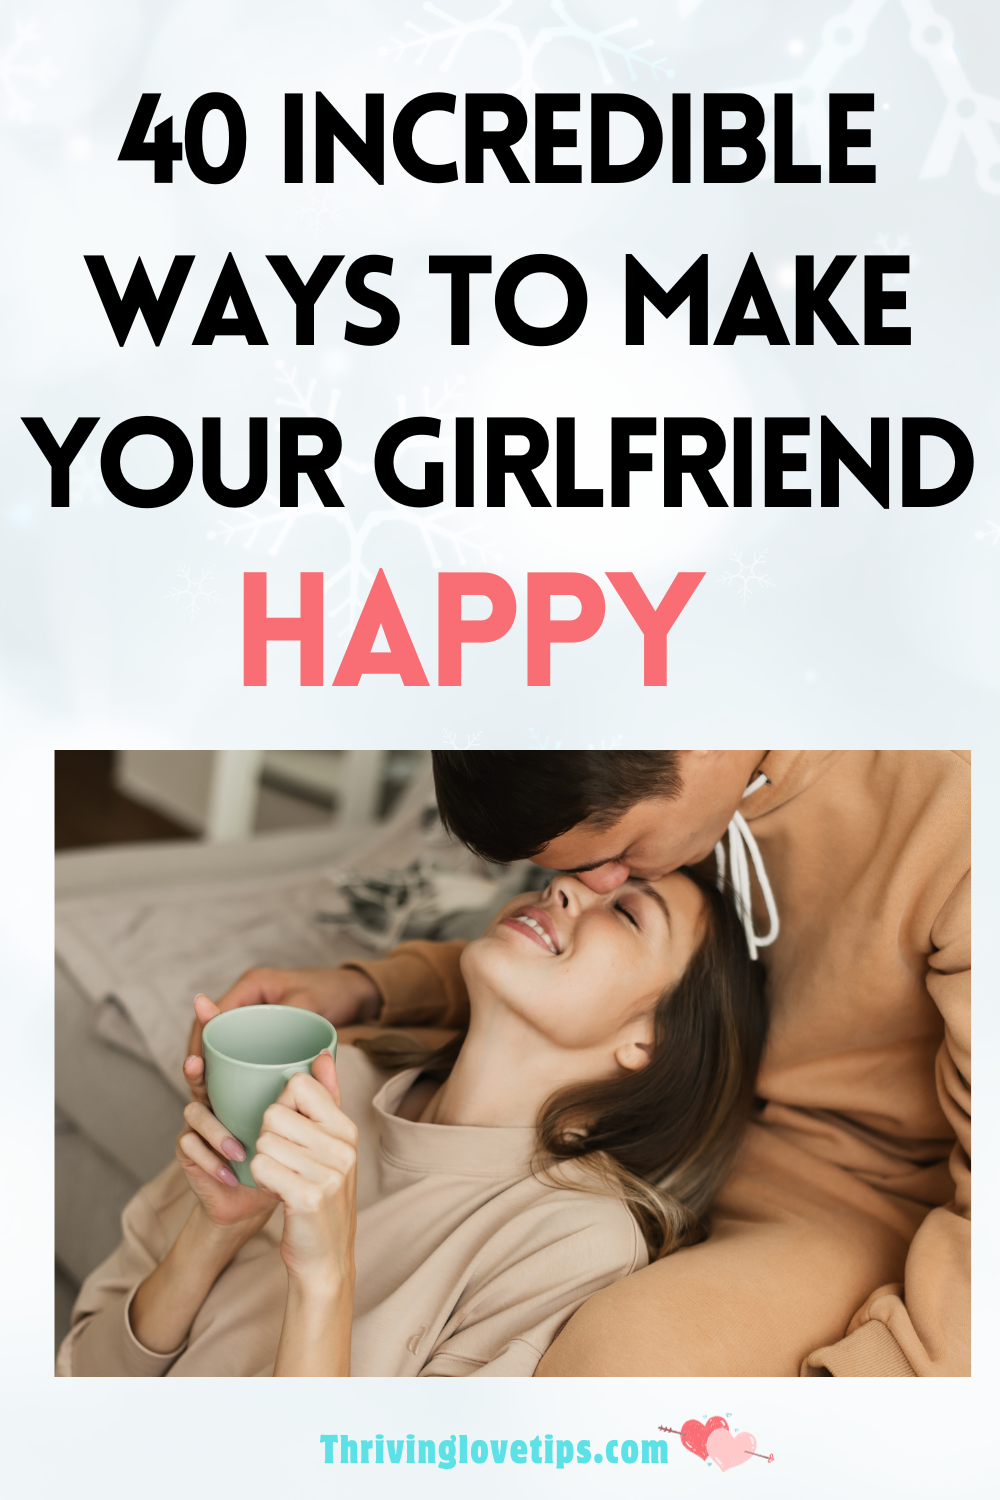 Things to Do to Make Your Girlfriend Happy